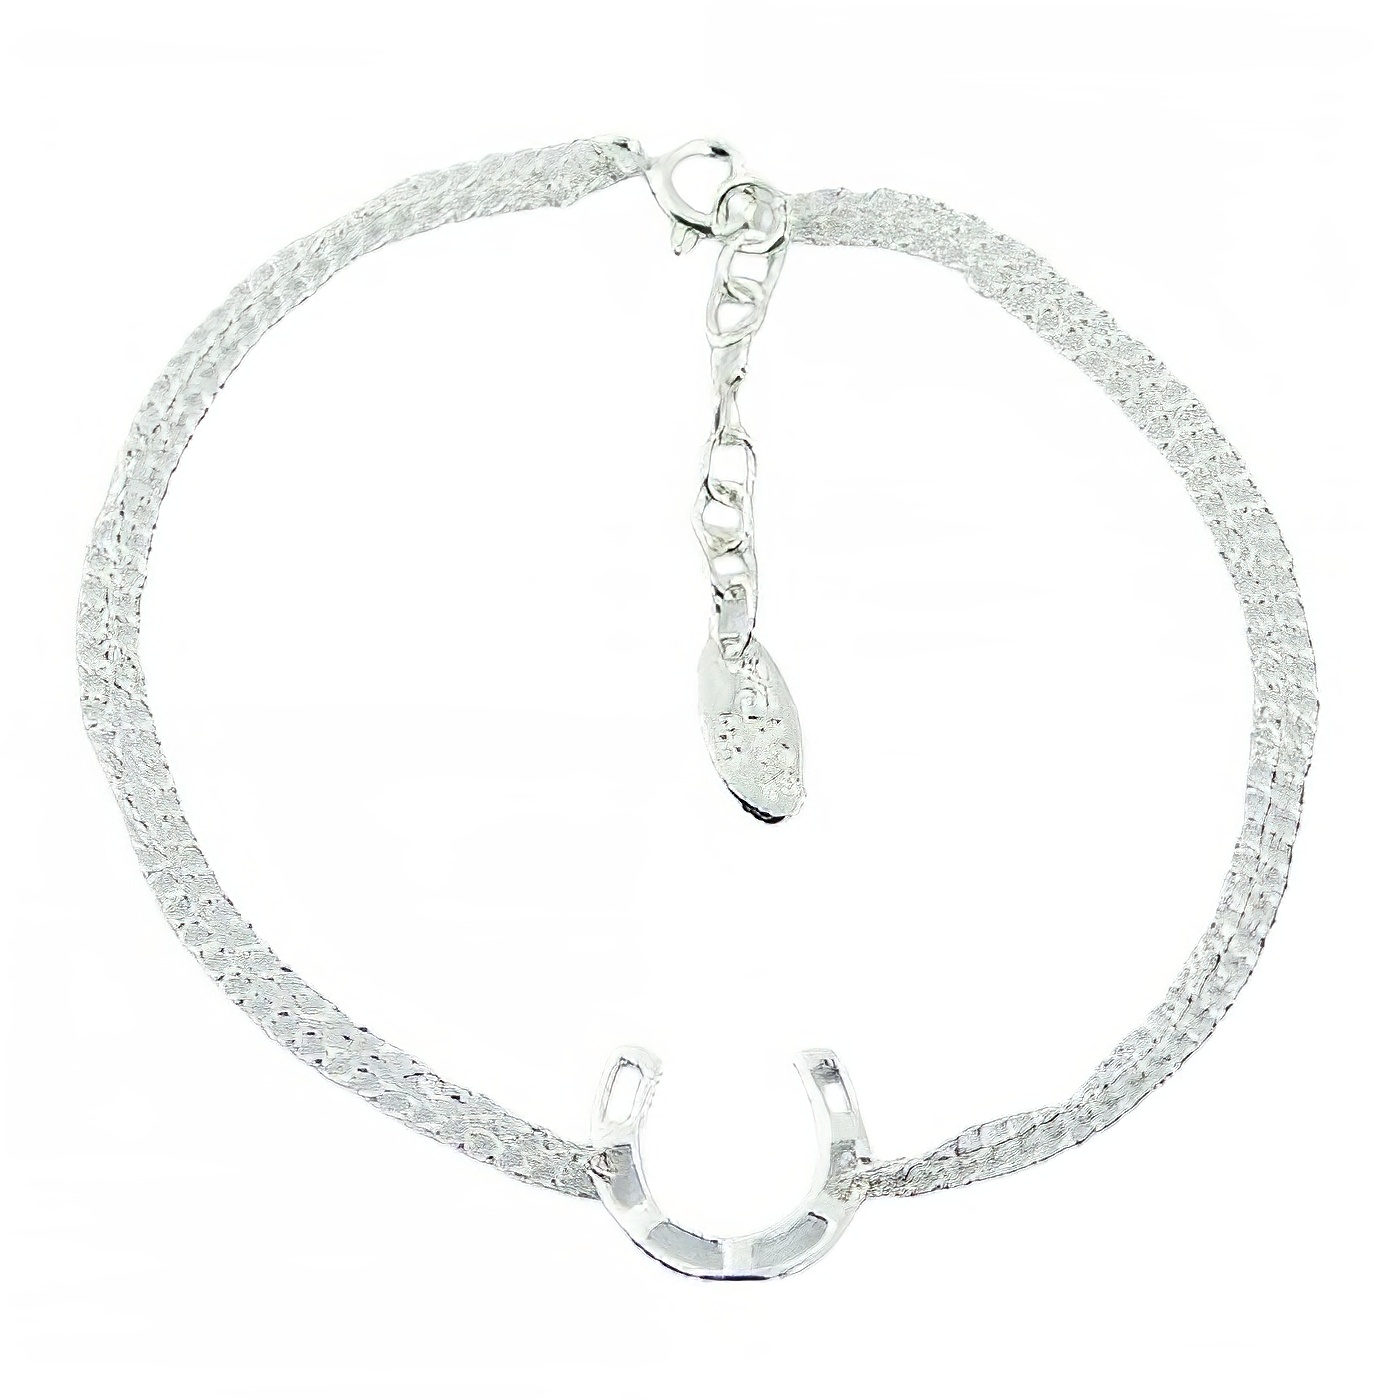 Double Sterling Silver Curb Chain Bracelet with Horseshoe Charm 